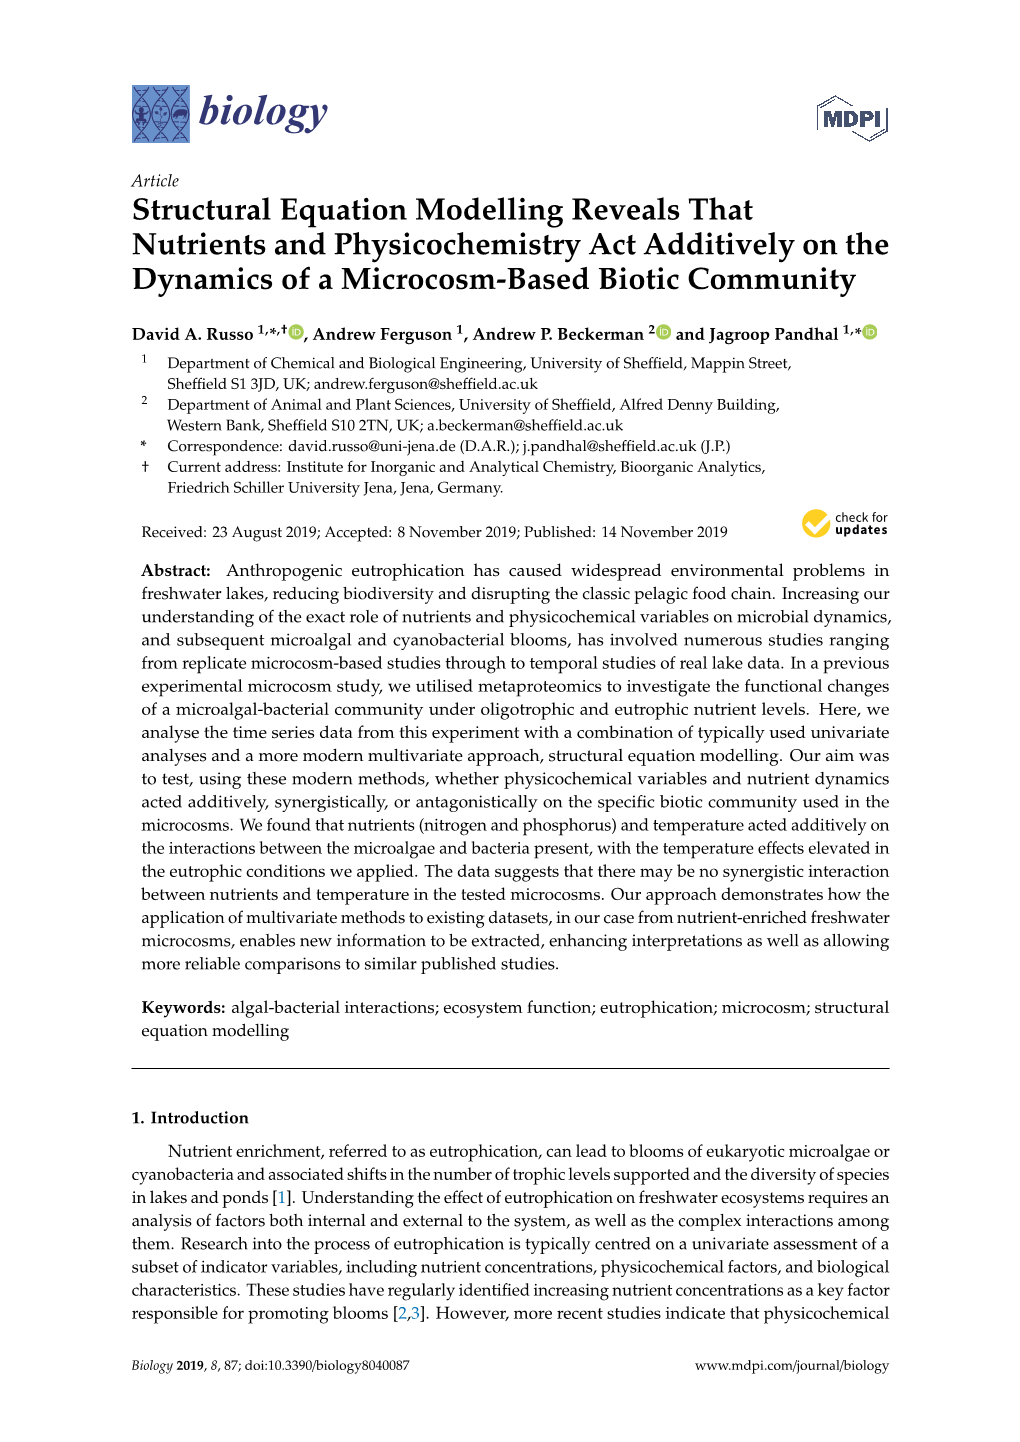 Structural Equation Modelling Reveals That Nutrients and Physicochemistry Act Additively on the Dynamics of a Microcosm-Based Biotic Community